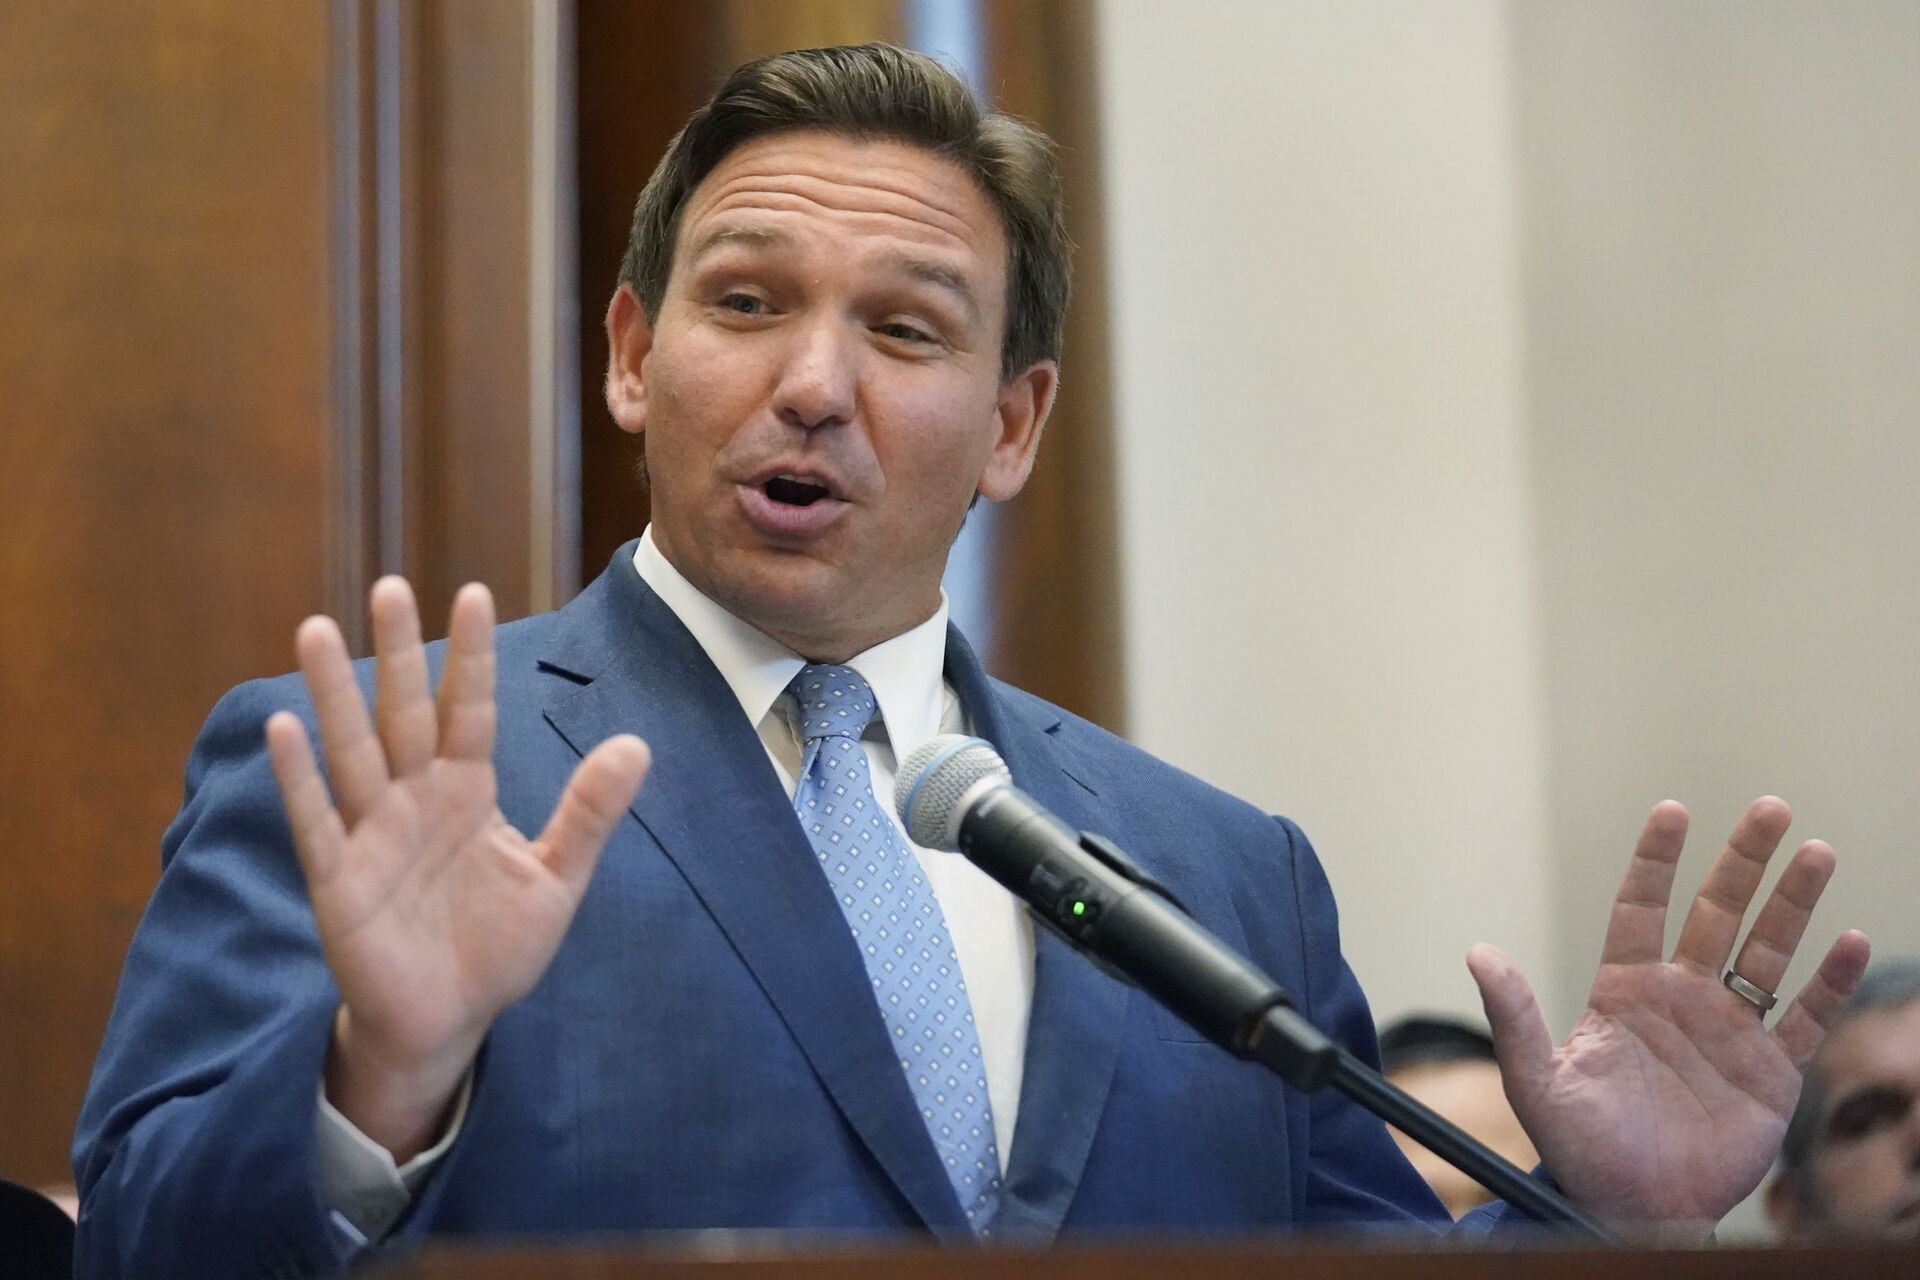 Florida Gov. Ron DeSantis gestures as he speaks, Monday, June 14, 2021, at the Shul of Bal Harbour, a Jewish community center in Surfside, Fla. DeSantis visited the South Florida temple to denounce anti-Semitism and stand with Israel, while signing a bill into law that would require public schools in his state to set aside moments of silence for children to meditate or pray - Sputnik International, 1920, 07.09.2021